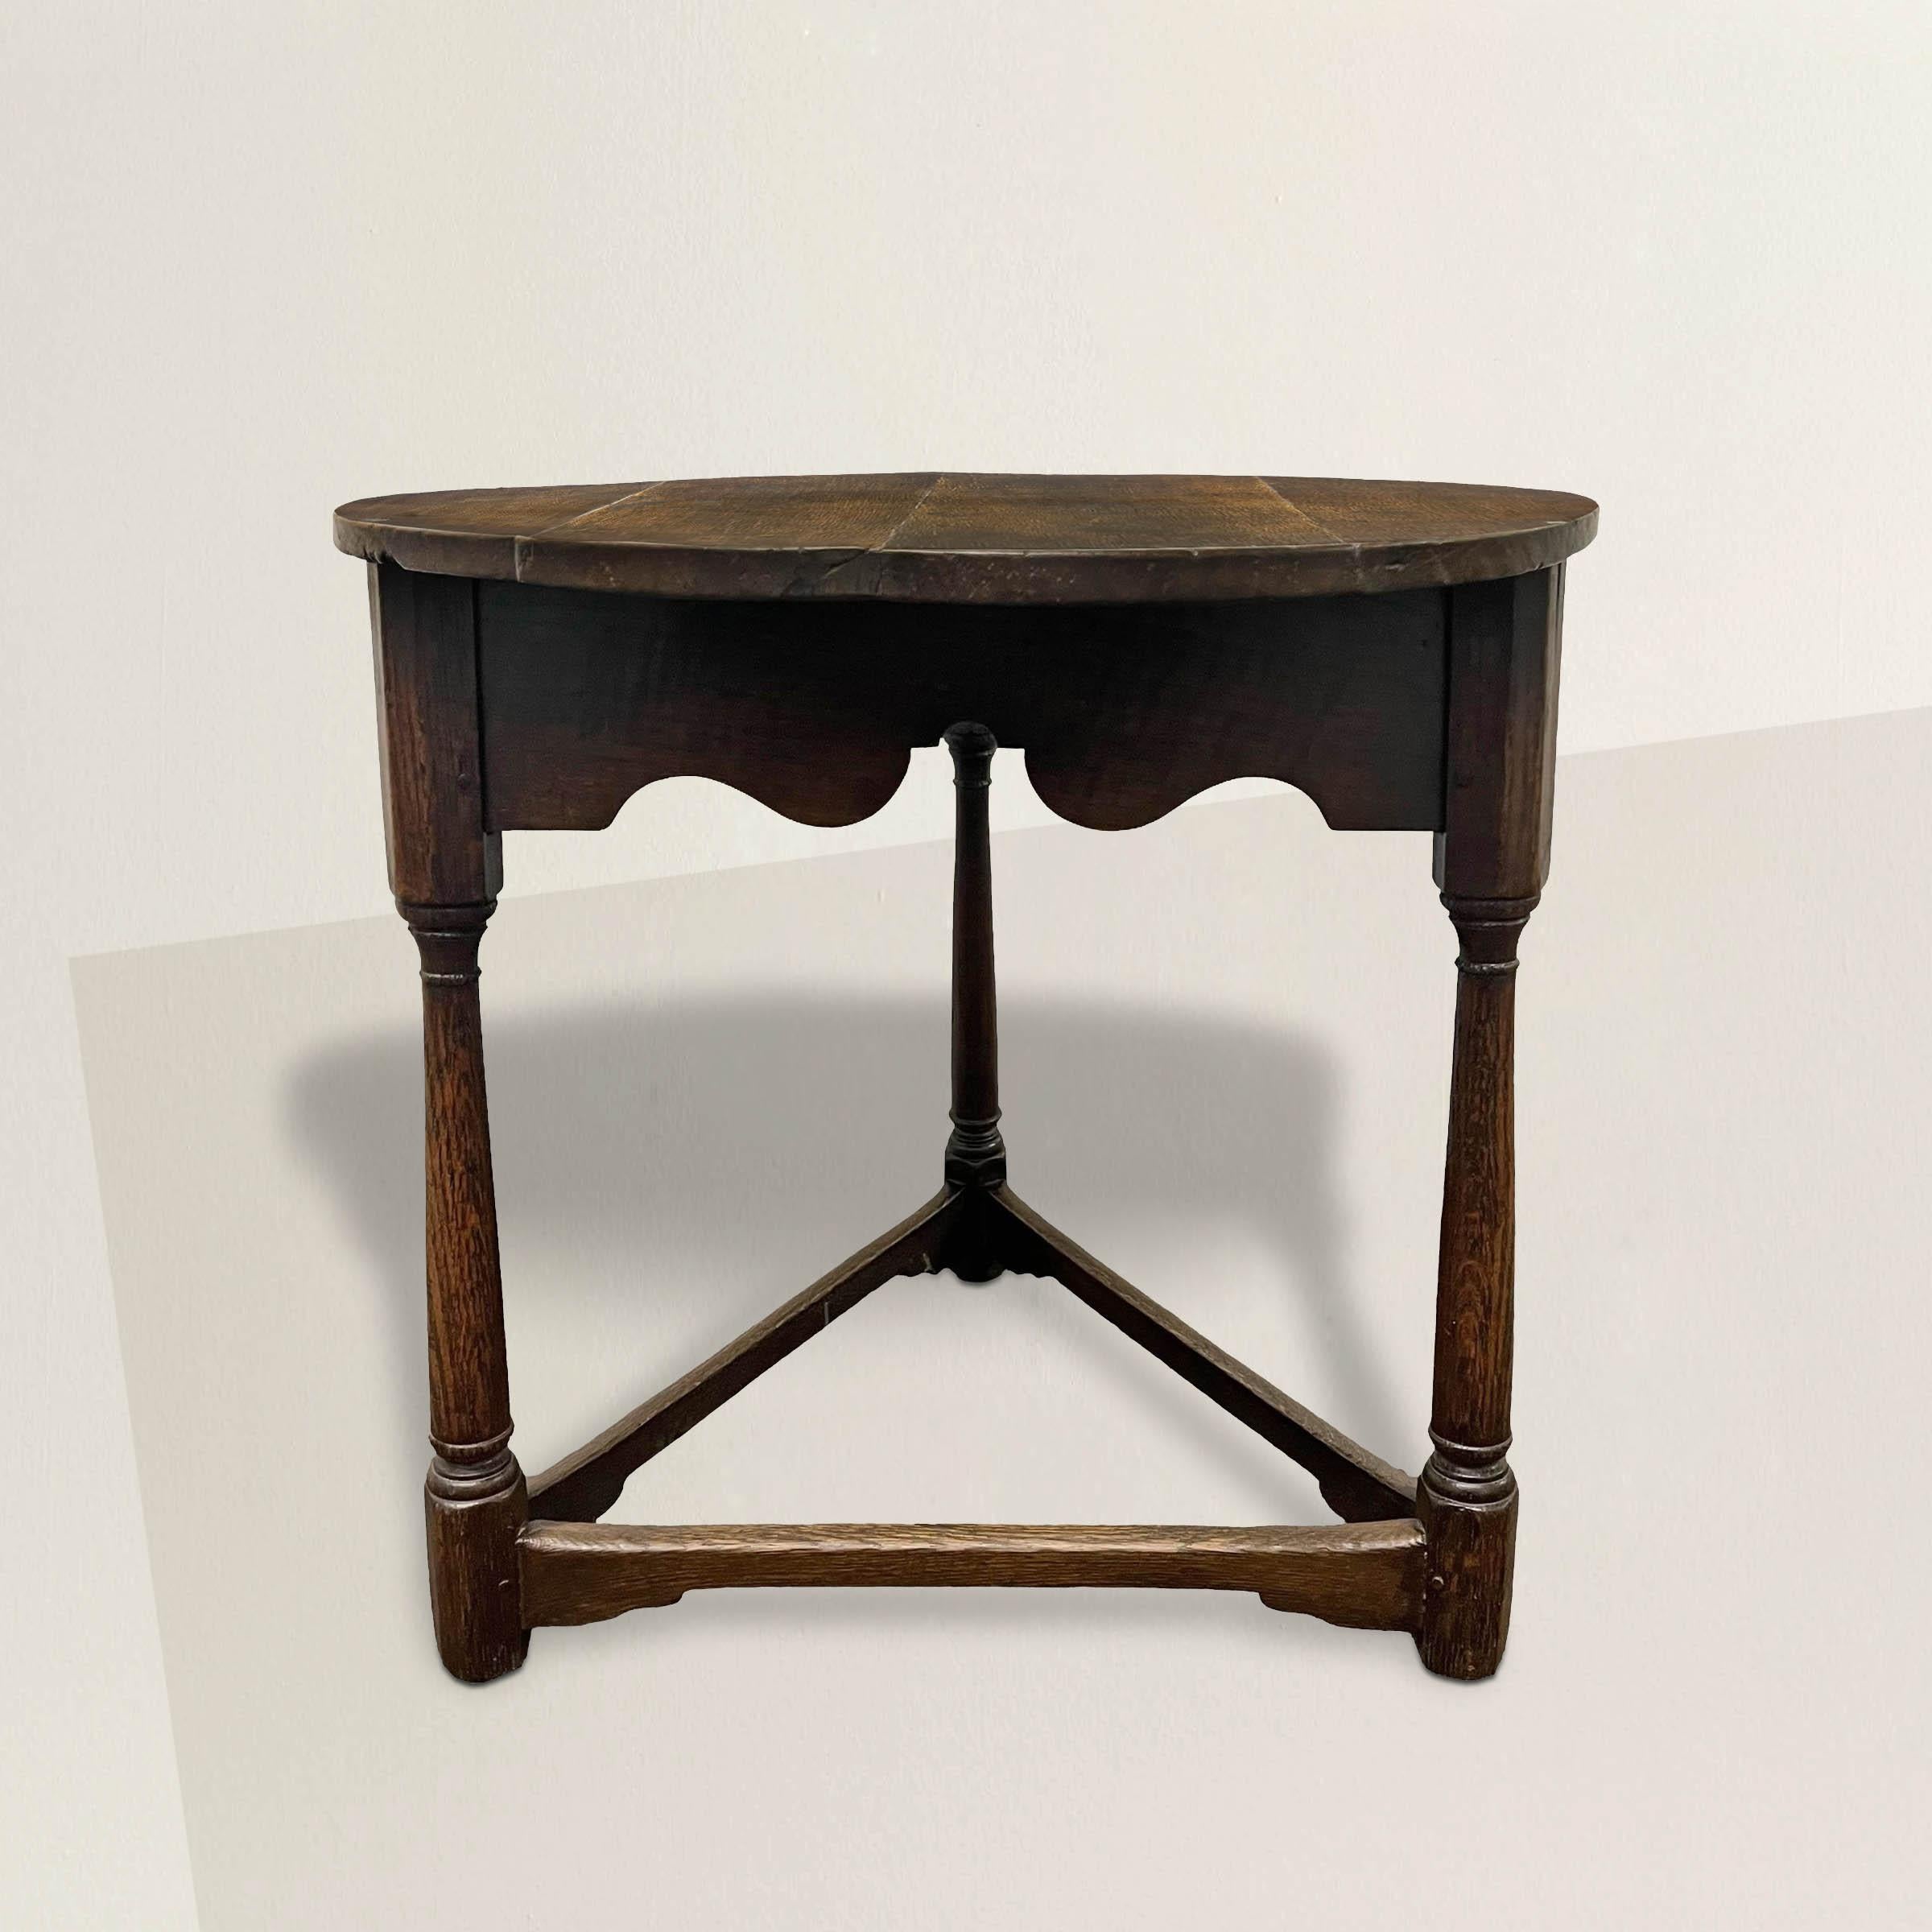 Behold the timeless elegance of this 18th-century English oak cricket table, a quintessential piece of English culture. Its round top, adorned with a scalloped apron, rests gracefully atop three exquisitely turned columnar legs, showcasing masterful